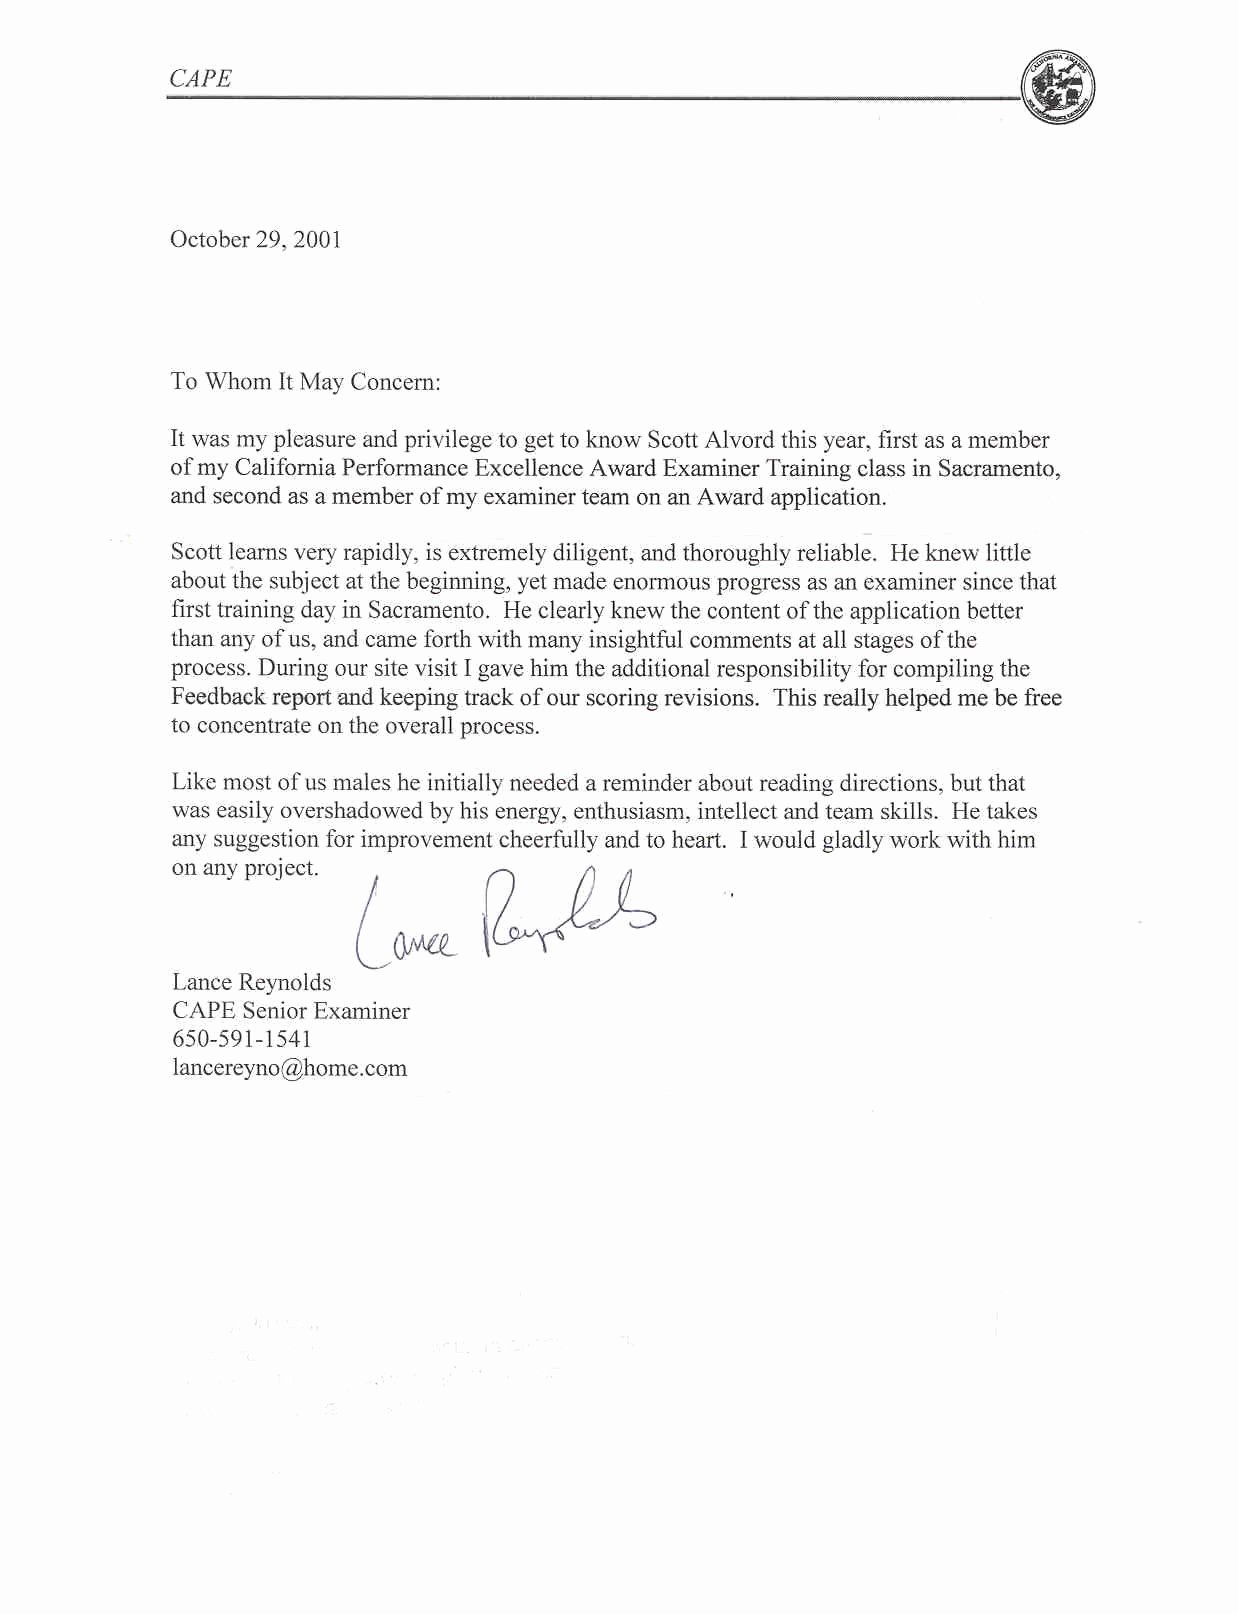 Letter Of Recomendation Template Awesome Download Letter Of Re Mendation Samples